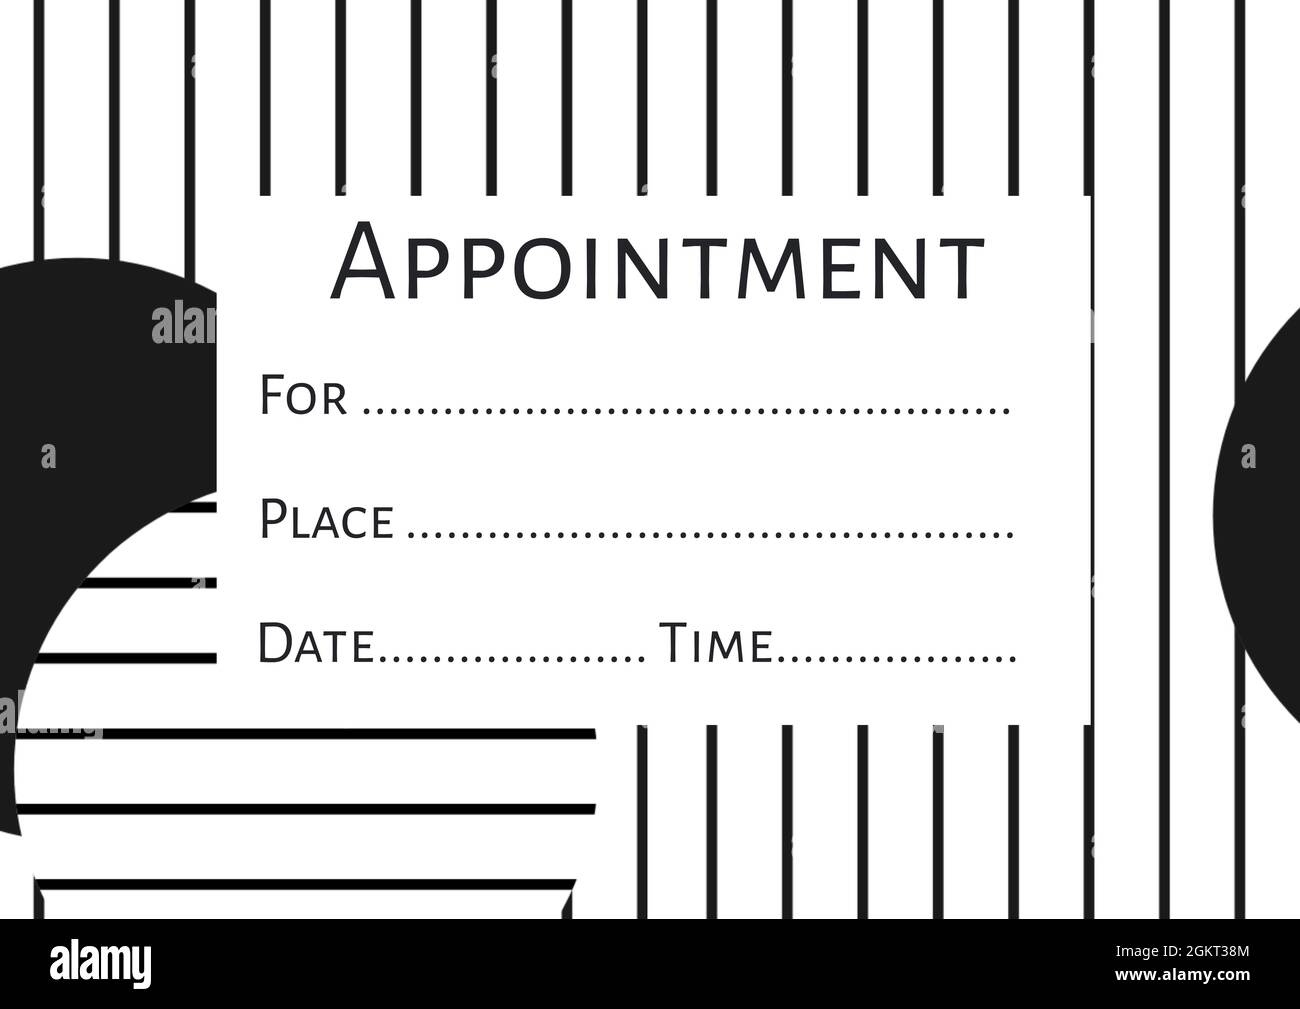 Appointment text with copy space against abstract shapes and stripes on white background Stock Photo